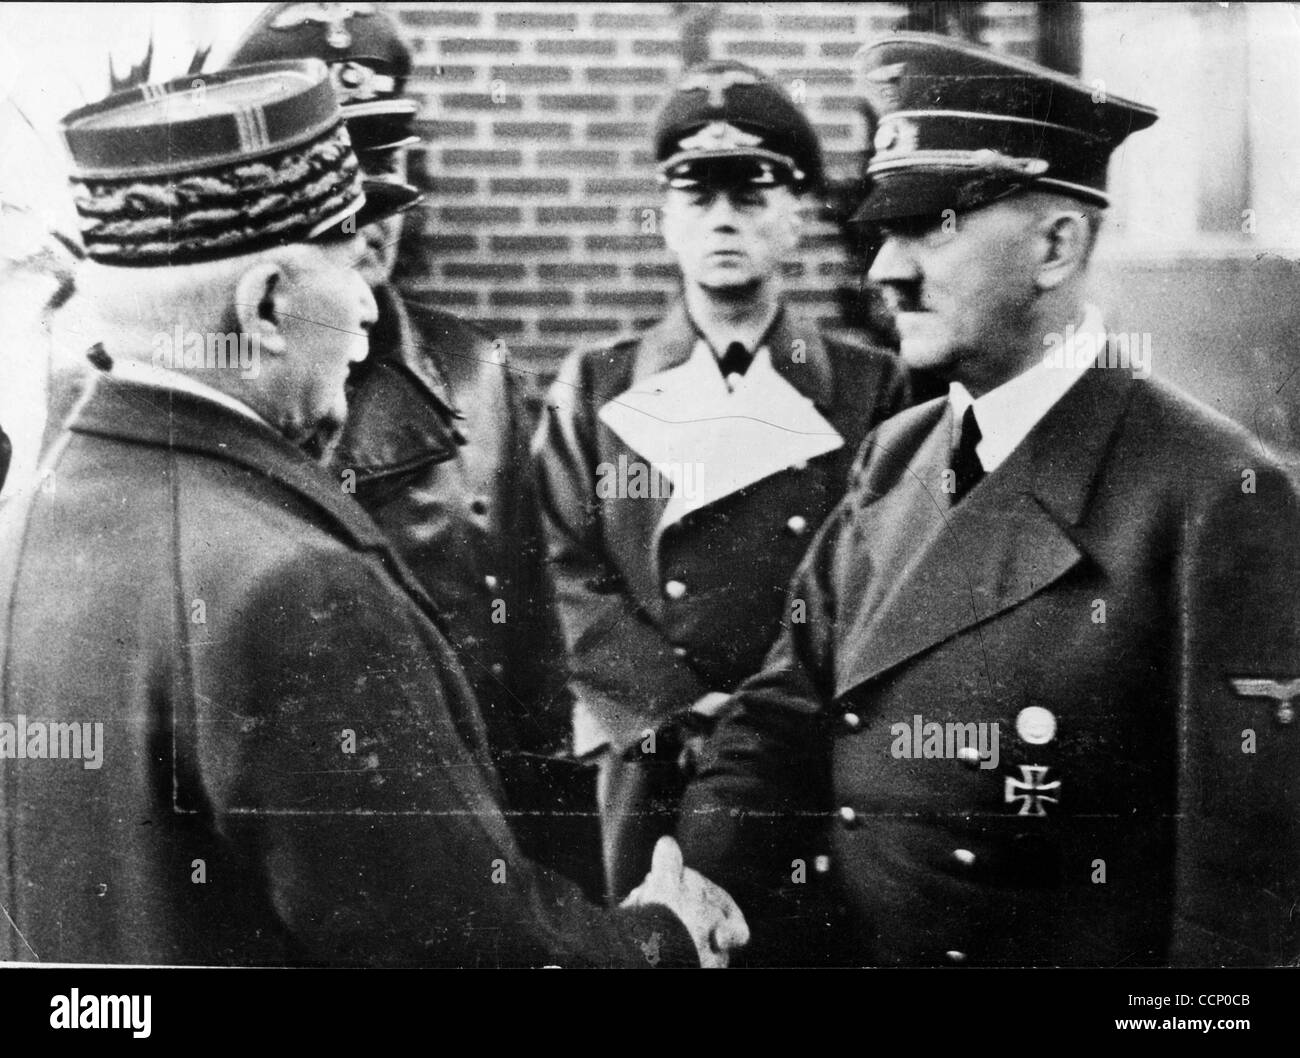 Oct. 24, 1940 - Berlin, Germany - ADOLF HITLER was the Fuhrer and Reichskanzler of Germany from 1933 to his death. He was leader of the National Socialist German Workers Party (NSDAP), better known as the Nazi Party. At the height of his power, the armies of Nazi Germany and its Axis Powers dominate Stock Photo